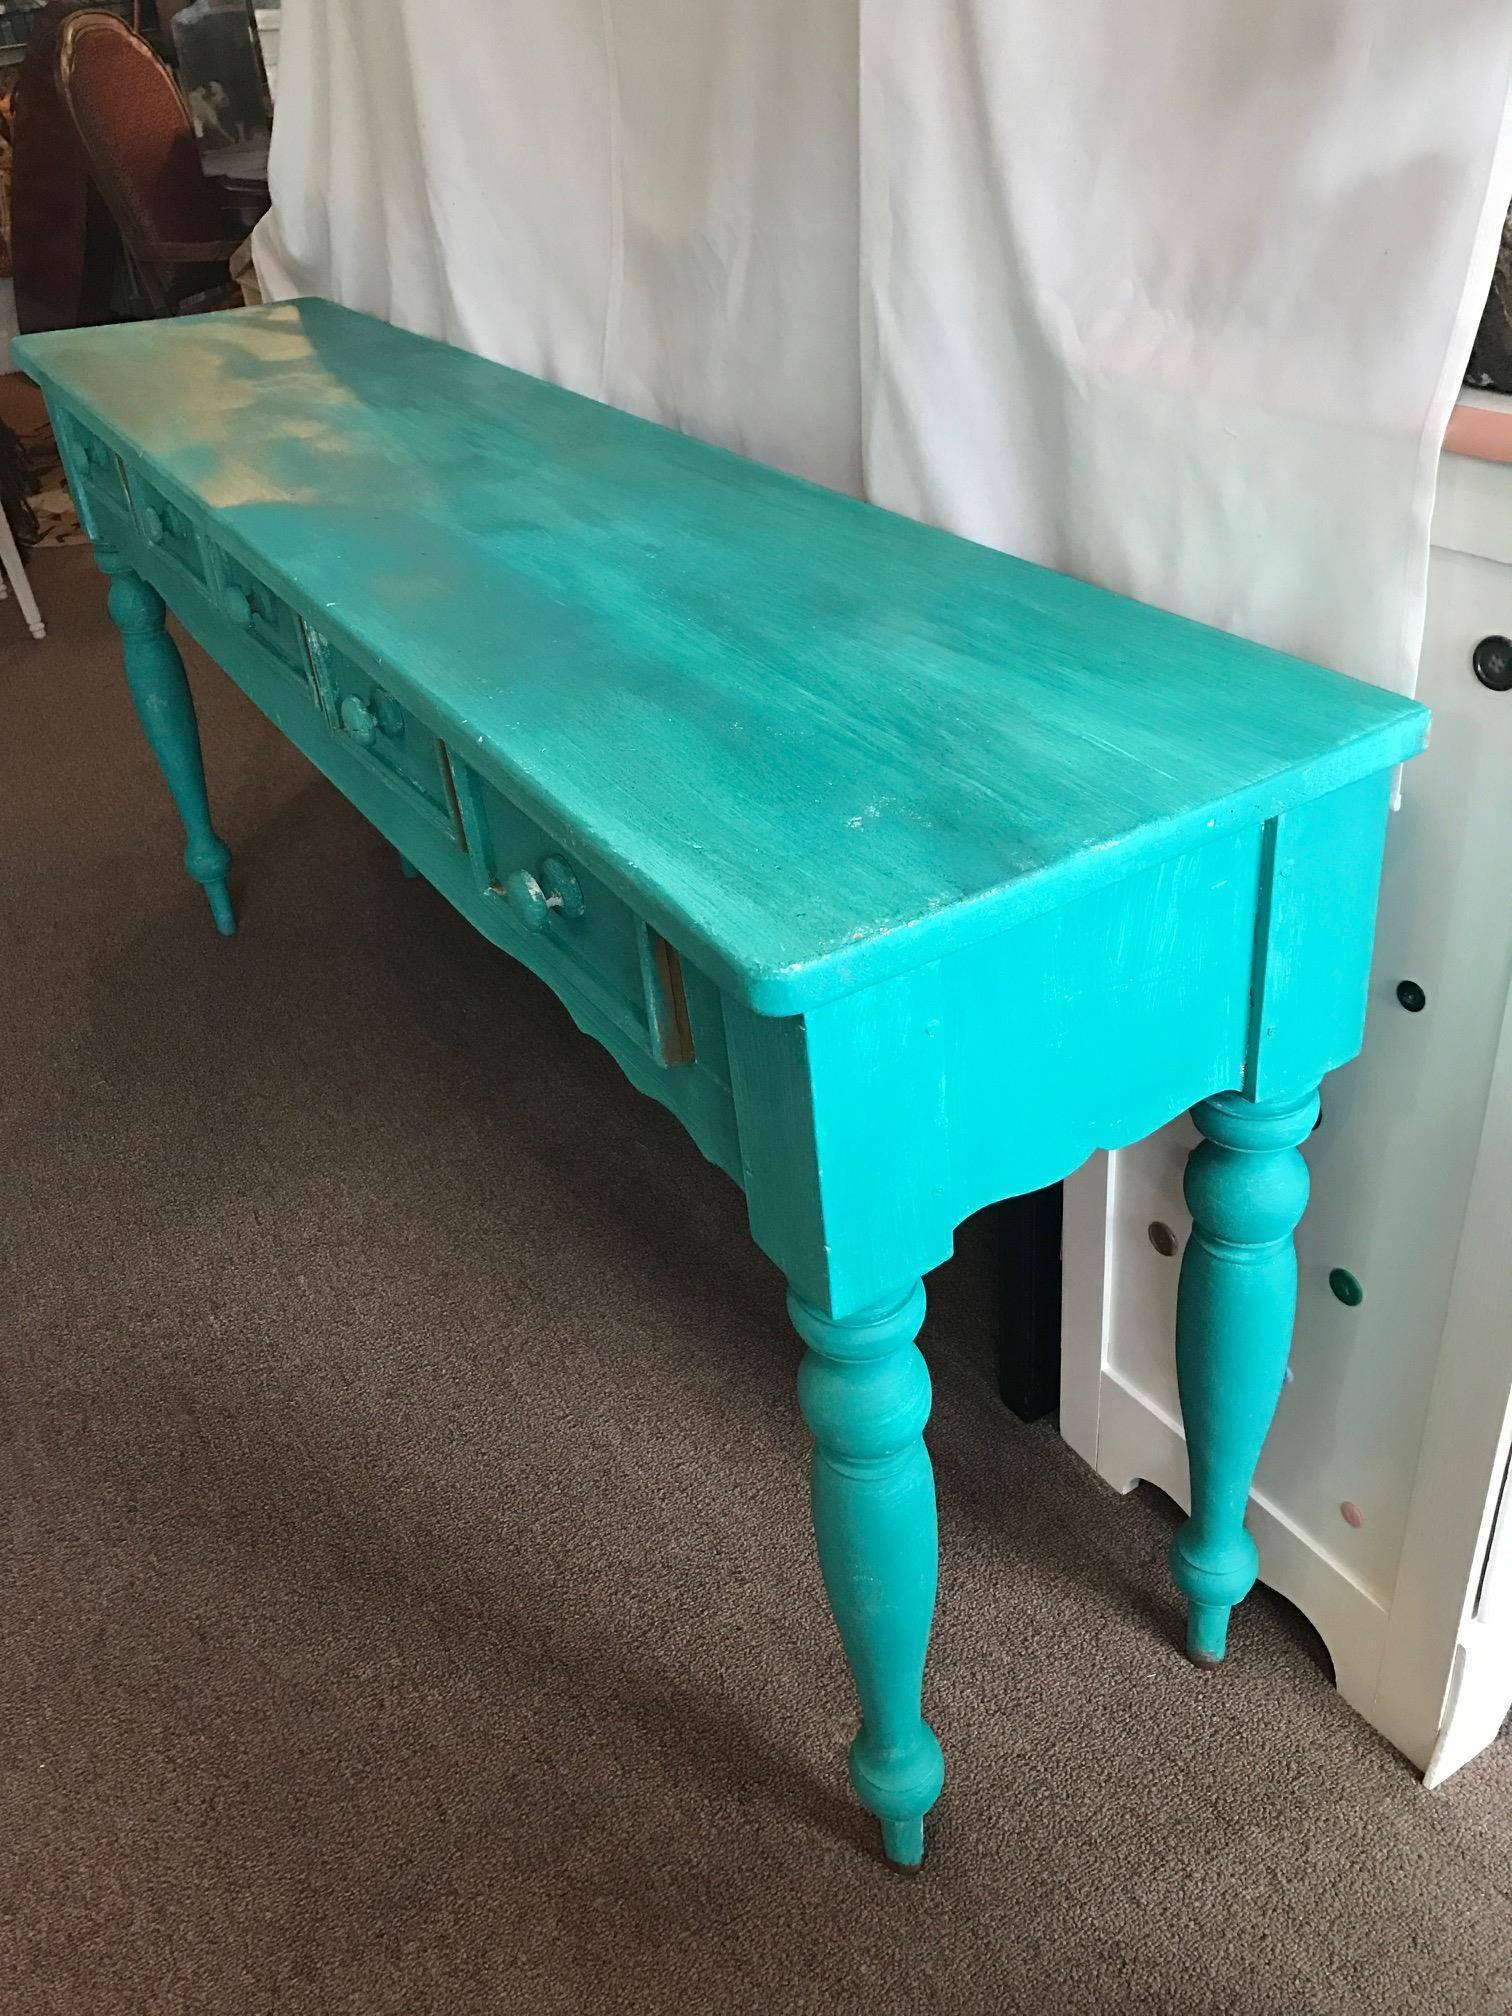 Shabby chic beach cottage farmhouse teal console, pine painted, five-drawers. Painted a great farmhouse chic teal with an undertone of soft white. Fabulously fun!